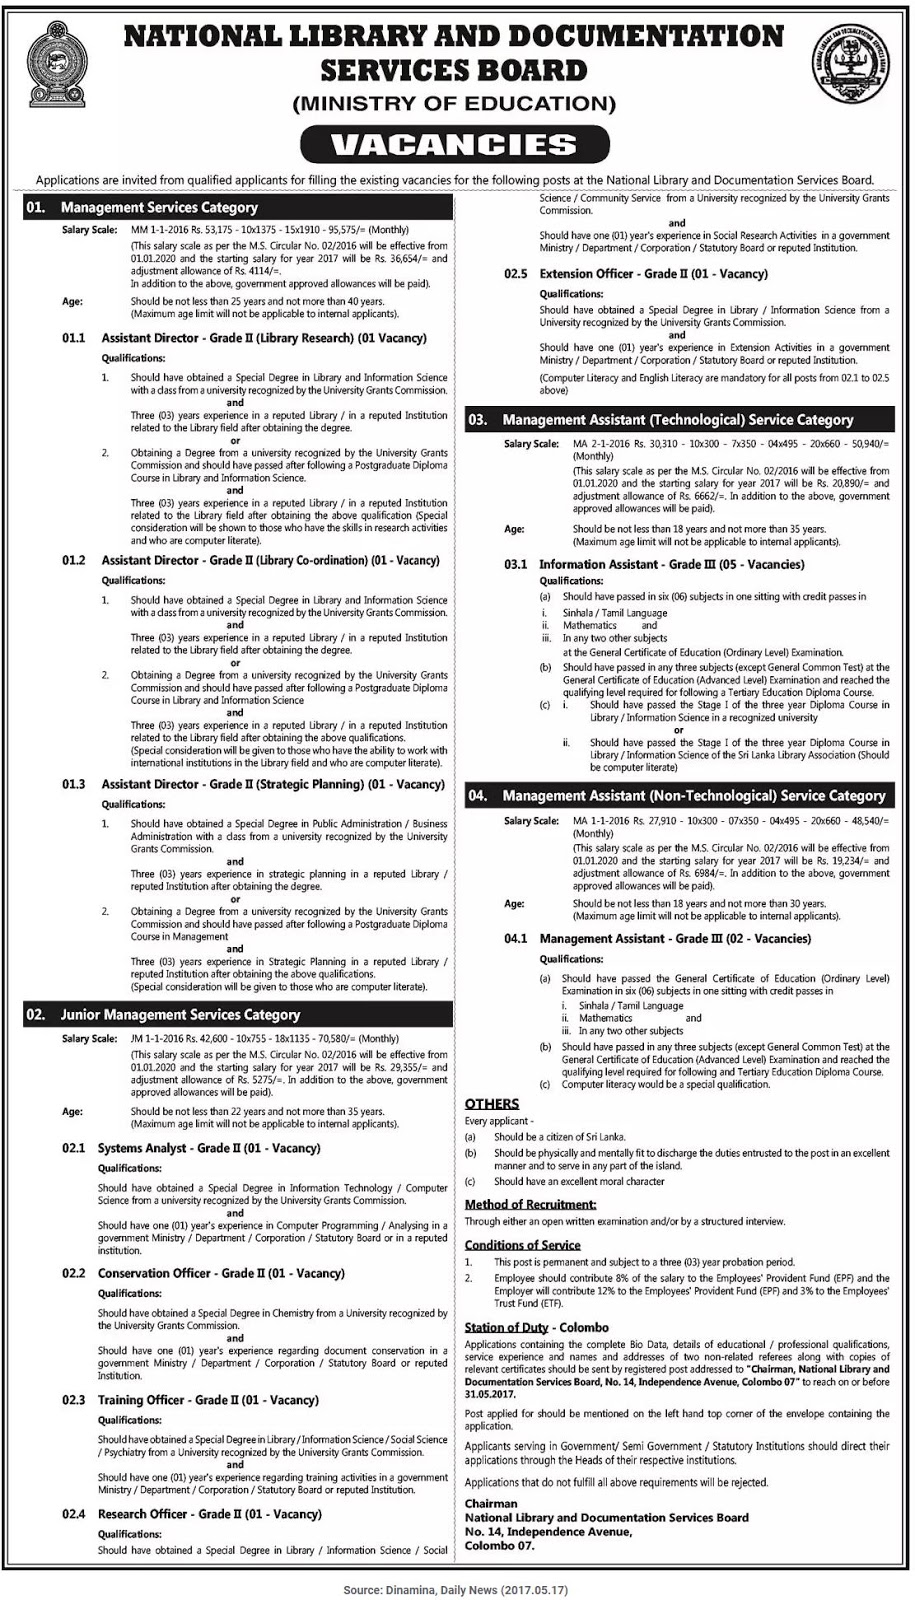 National Library & Documentation Services Board Vacancies